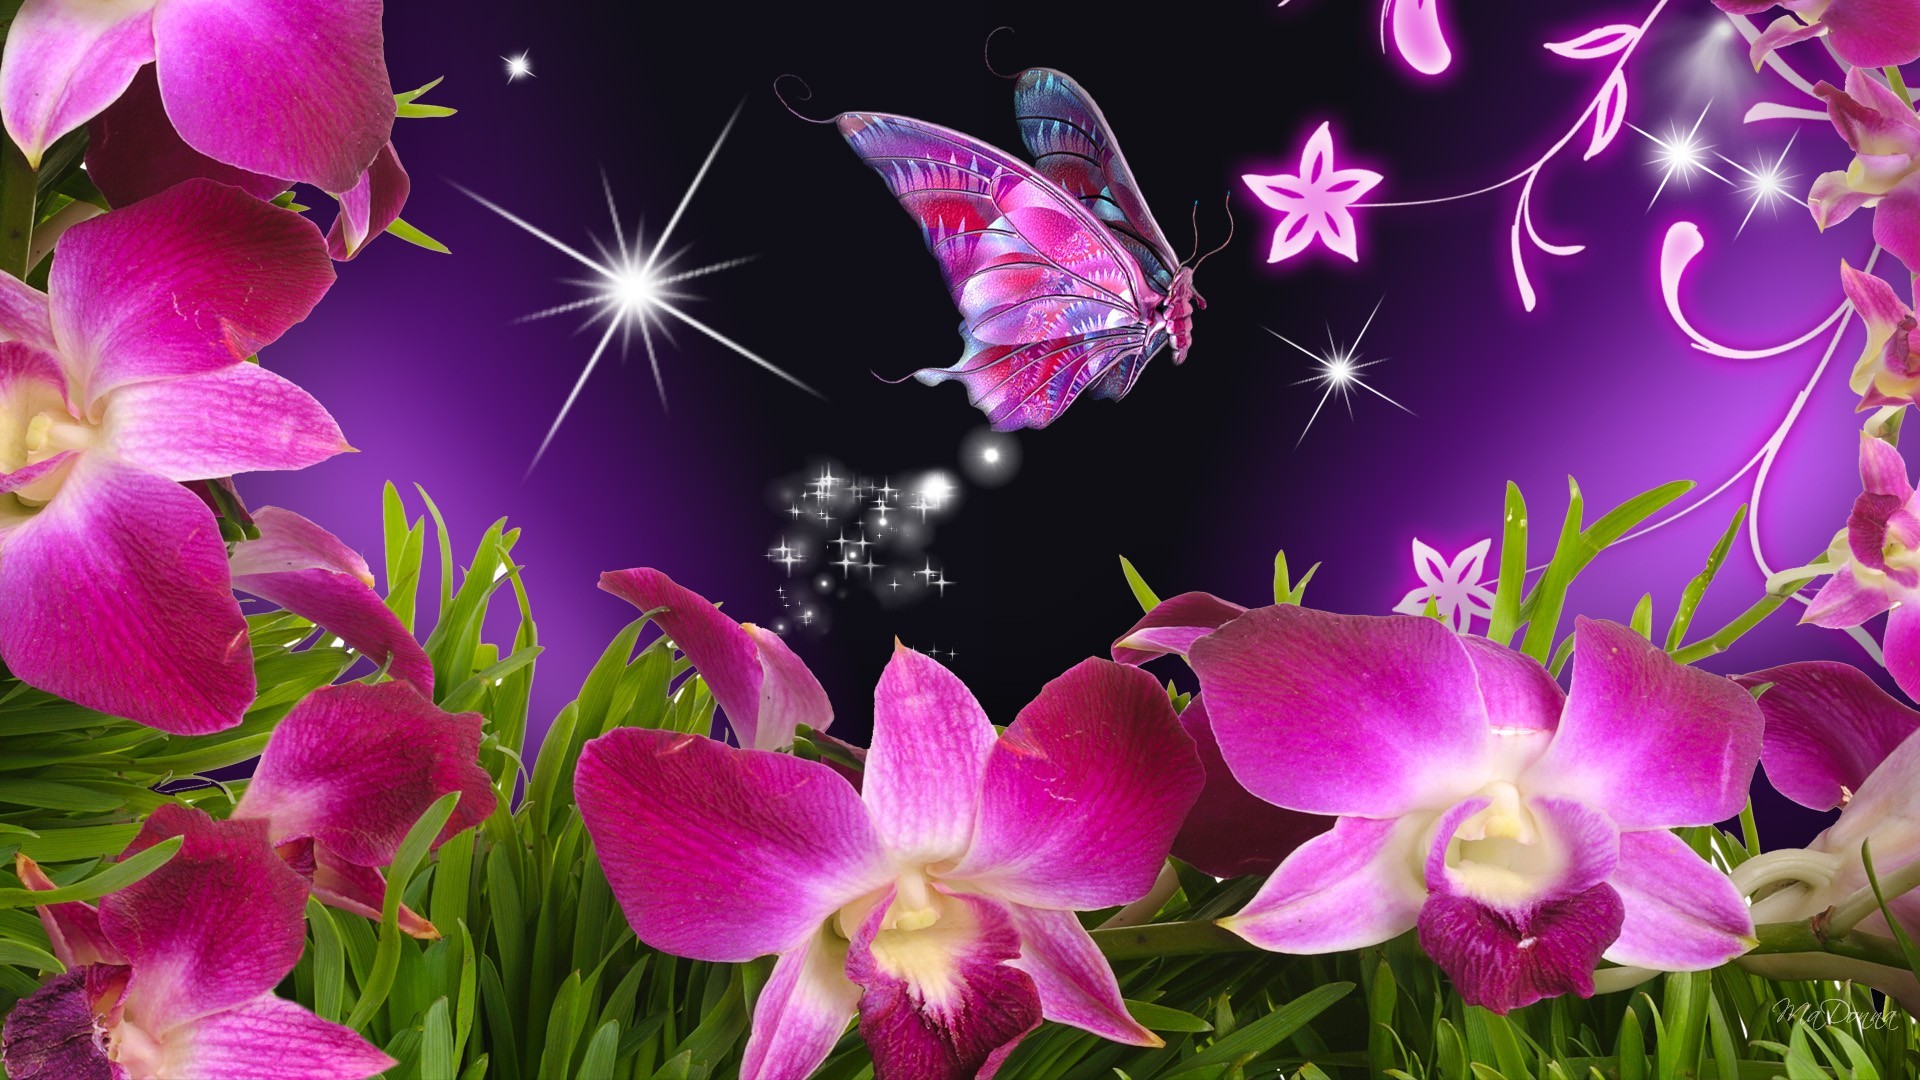 Flowers For Beautiful Flowers And Butterflies Wallpapers wallpapers,themes,ect. Pinterest Butterfly wallpaper, Wallpaper and Illustrations